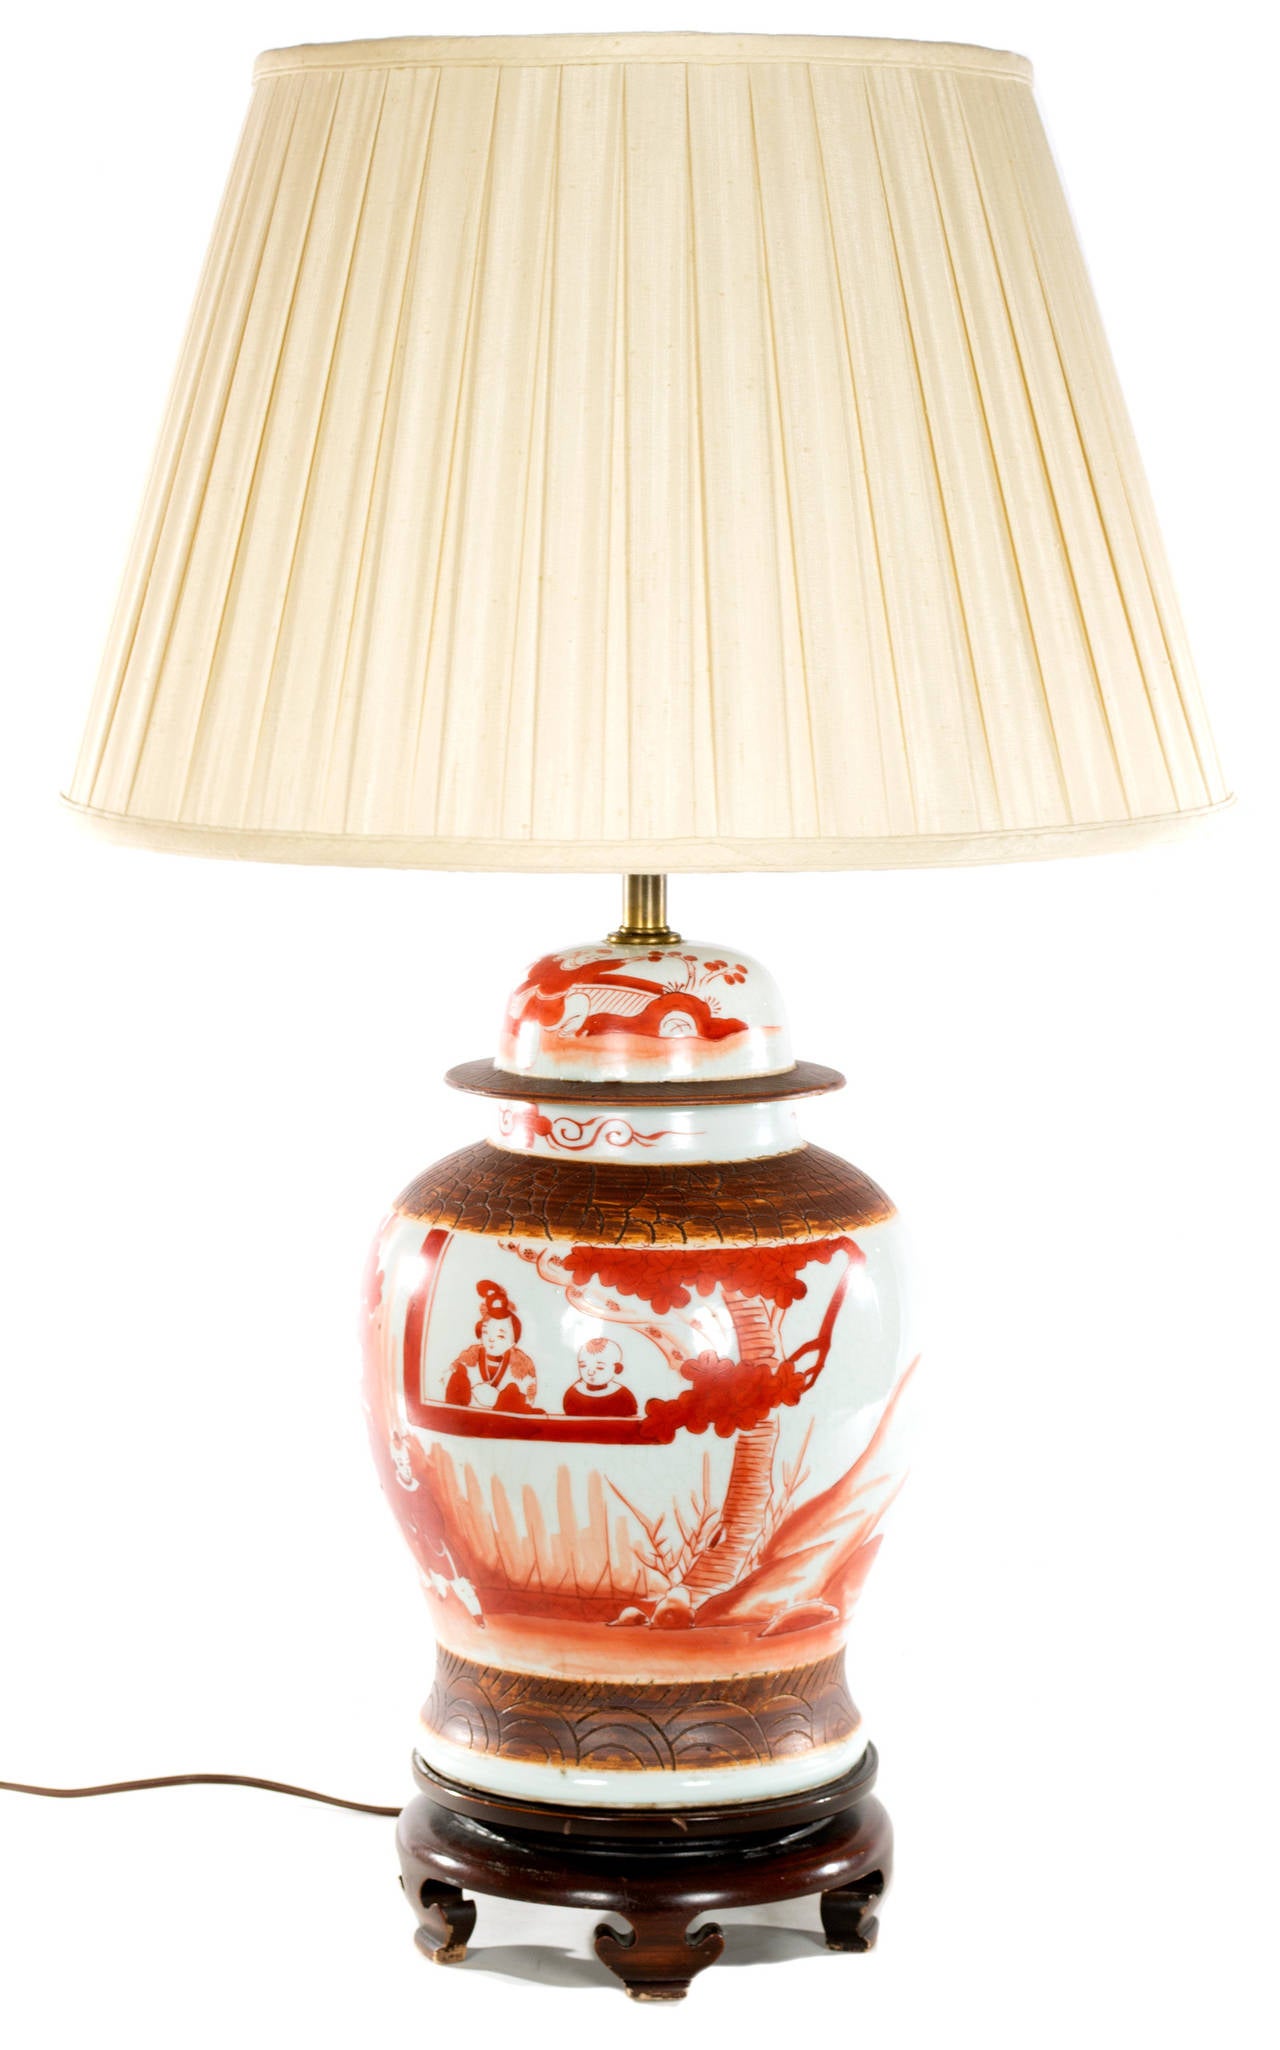 20th Century Chinese Red-Painted Baluster Vase Lamp